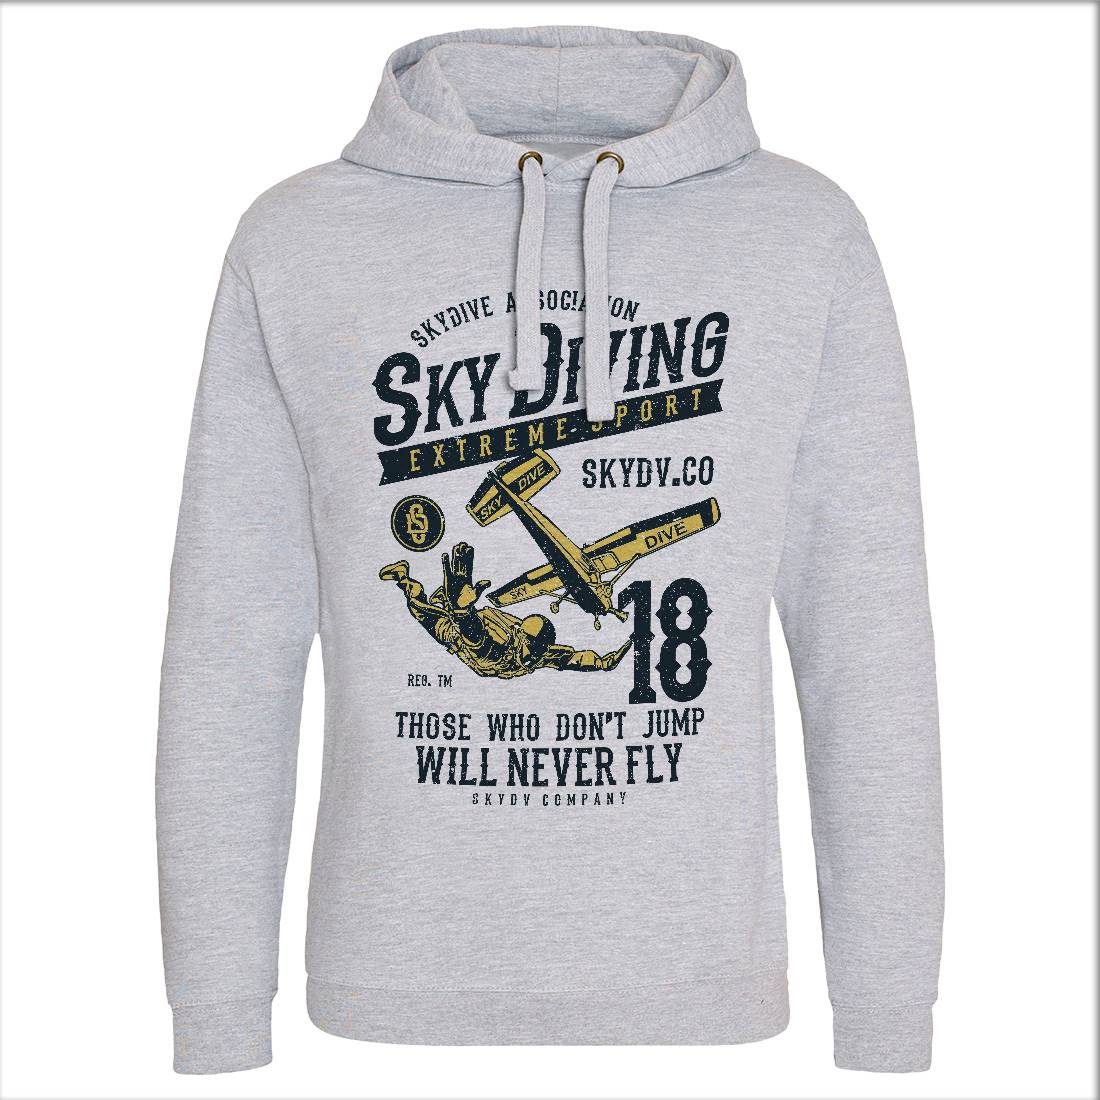 Sky Diving Mens Hoodie Without Pocket Sport A758